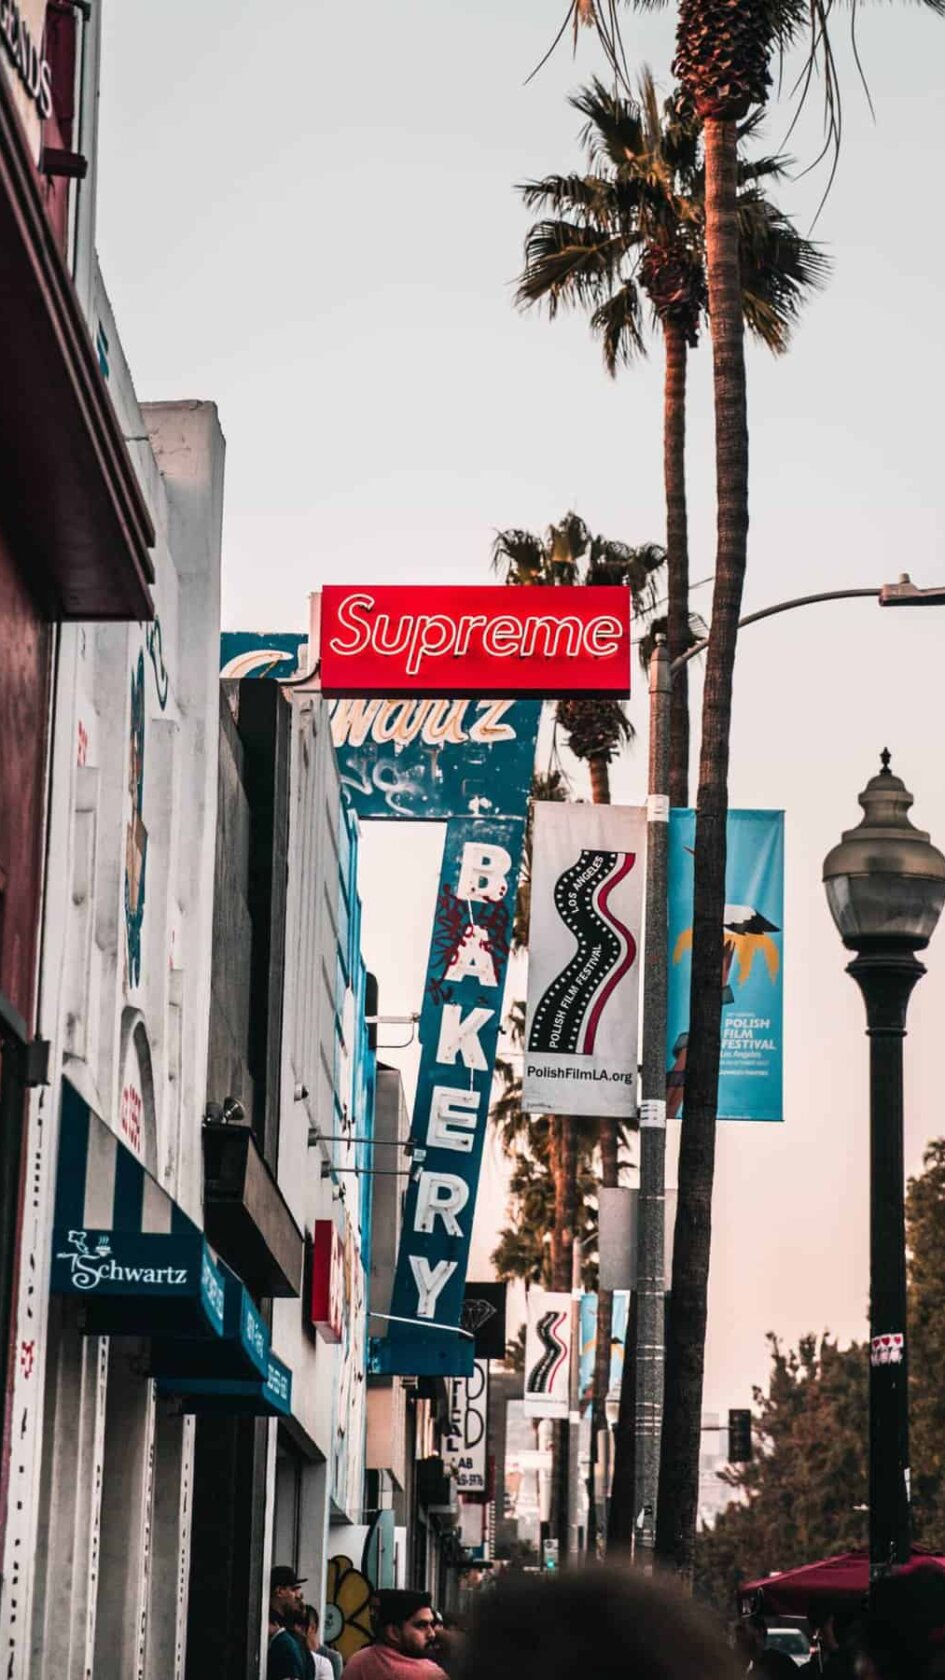 A shot of Sunset Strip with the Supreme sign out front.